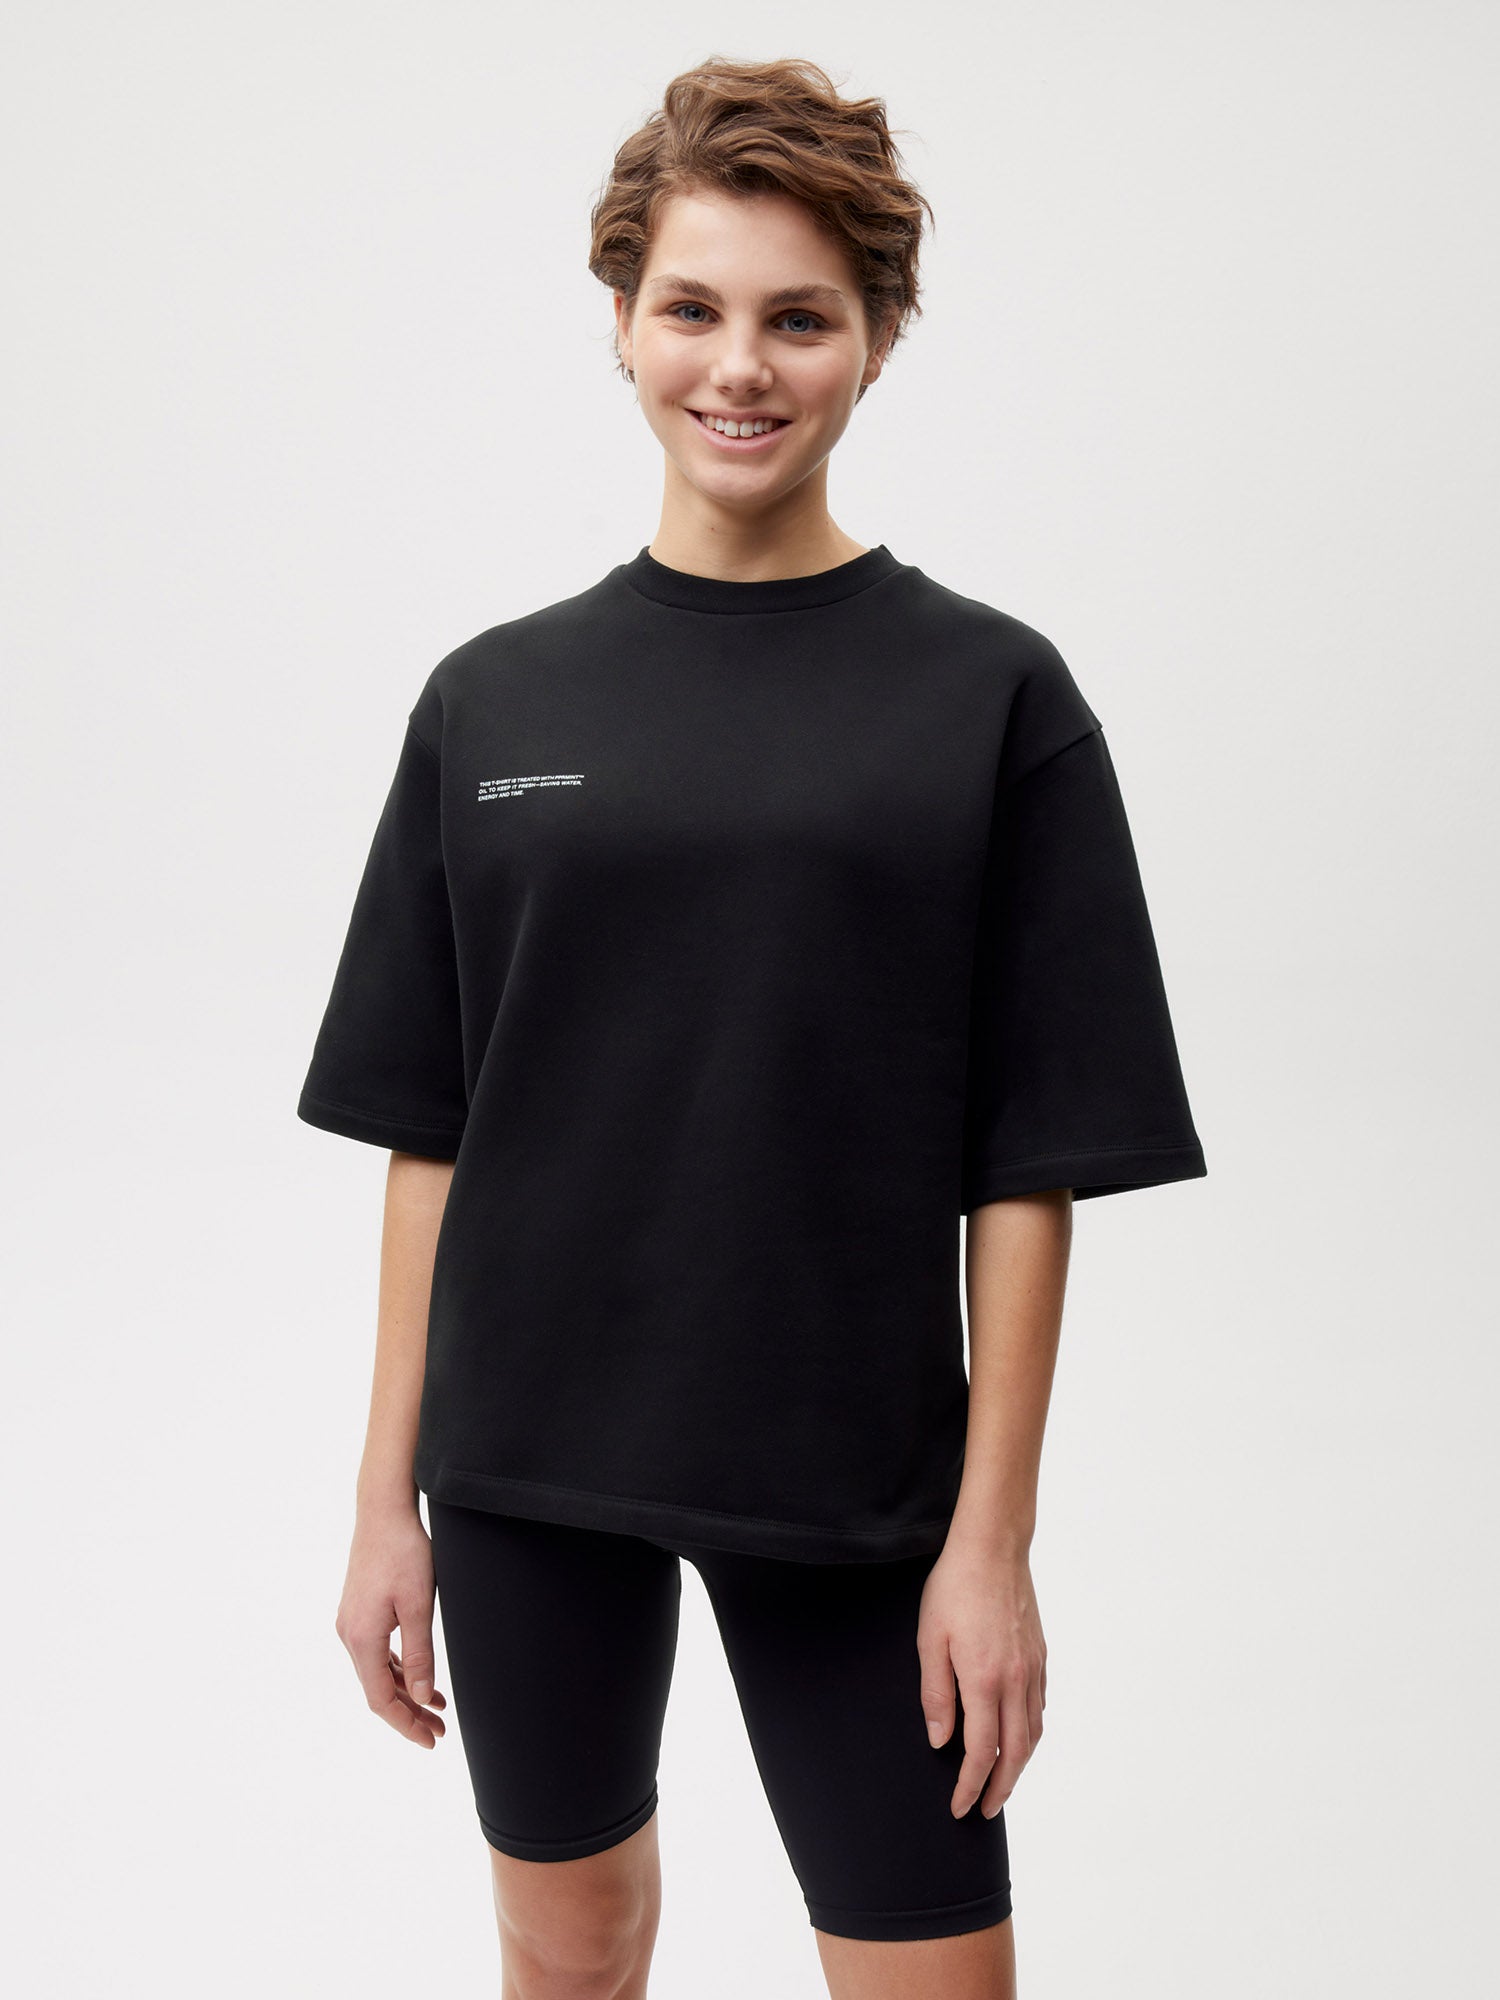 Relaxed Fit T Shirt Black Female